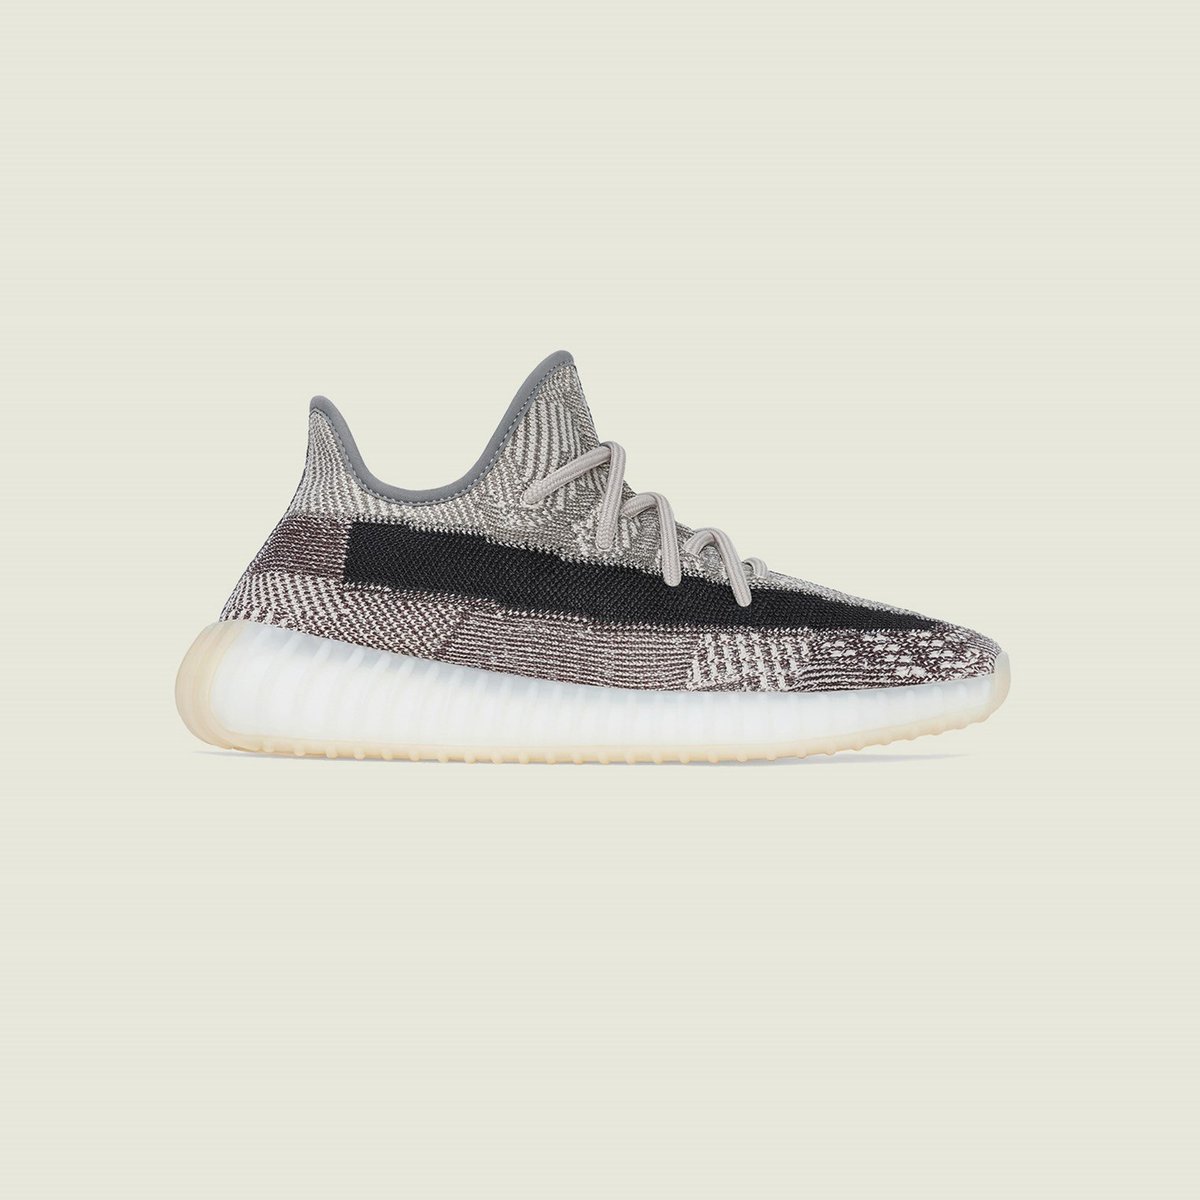 Yeezy Boost 350 V2 Zyon in the SNS 